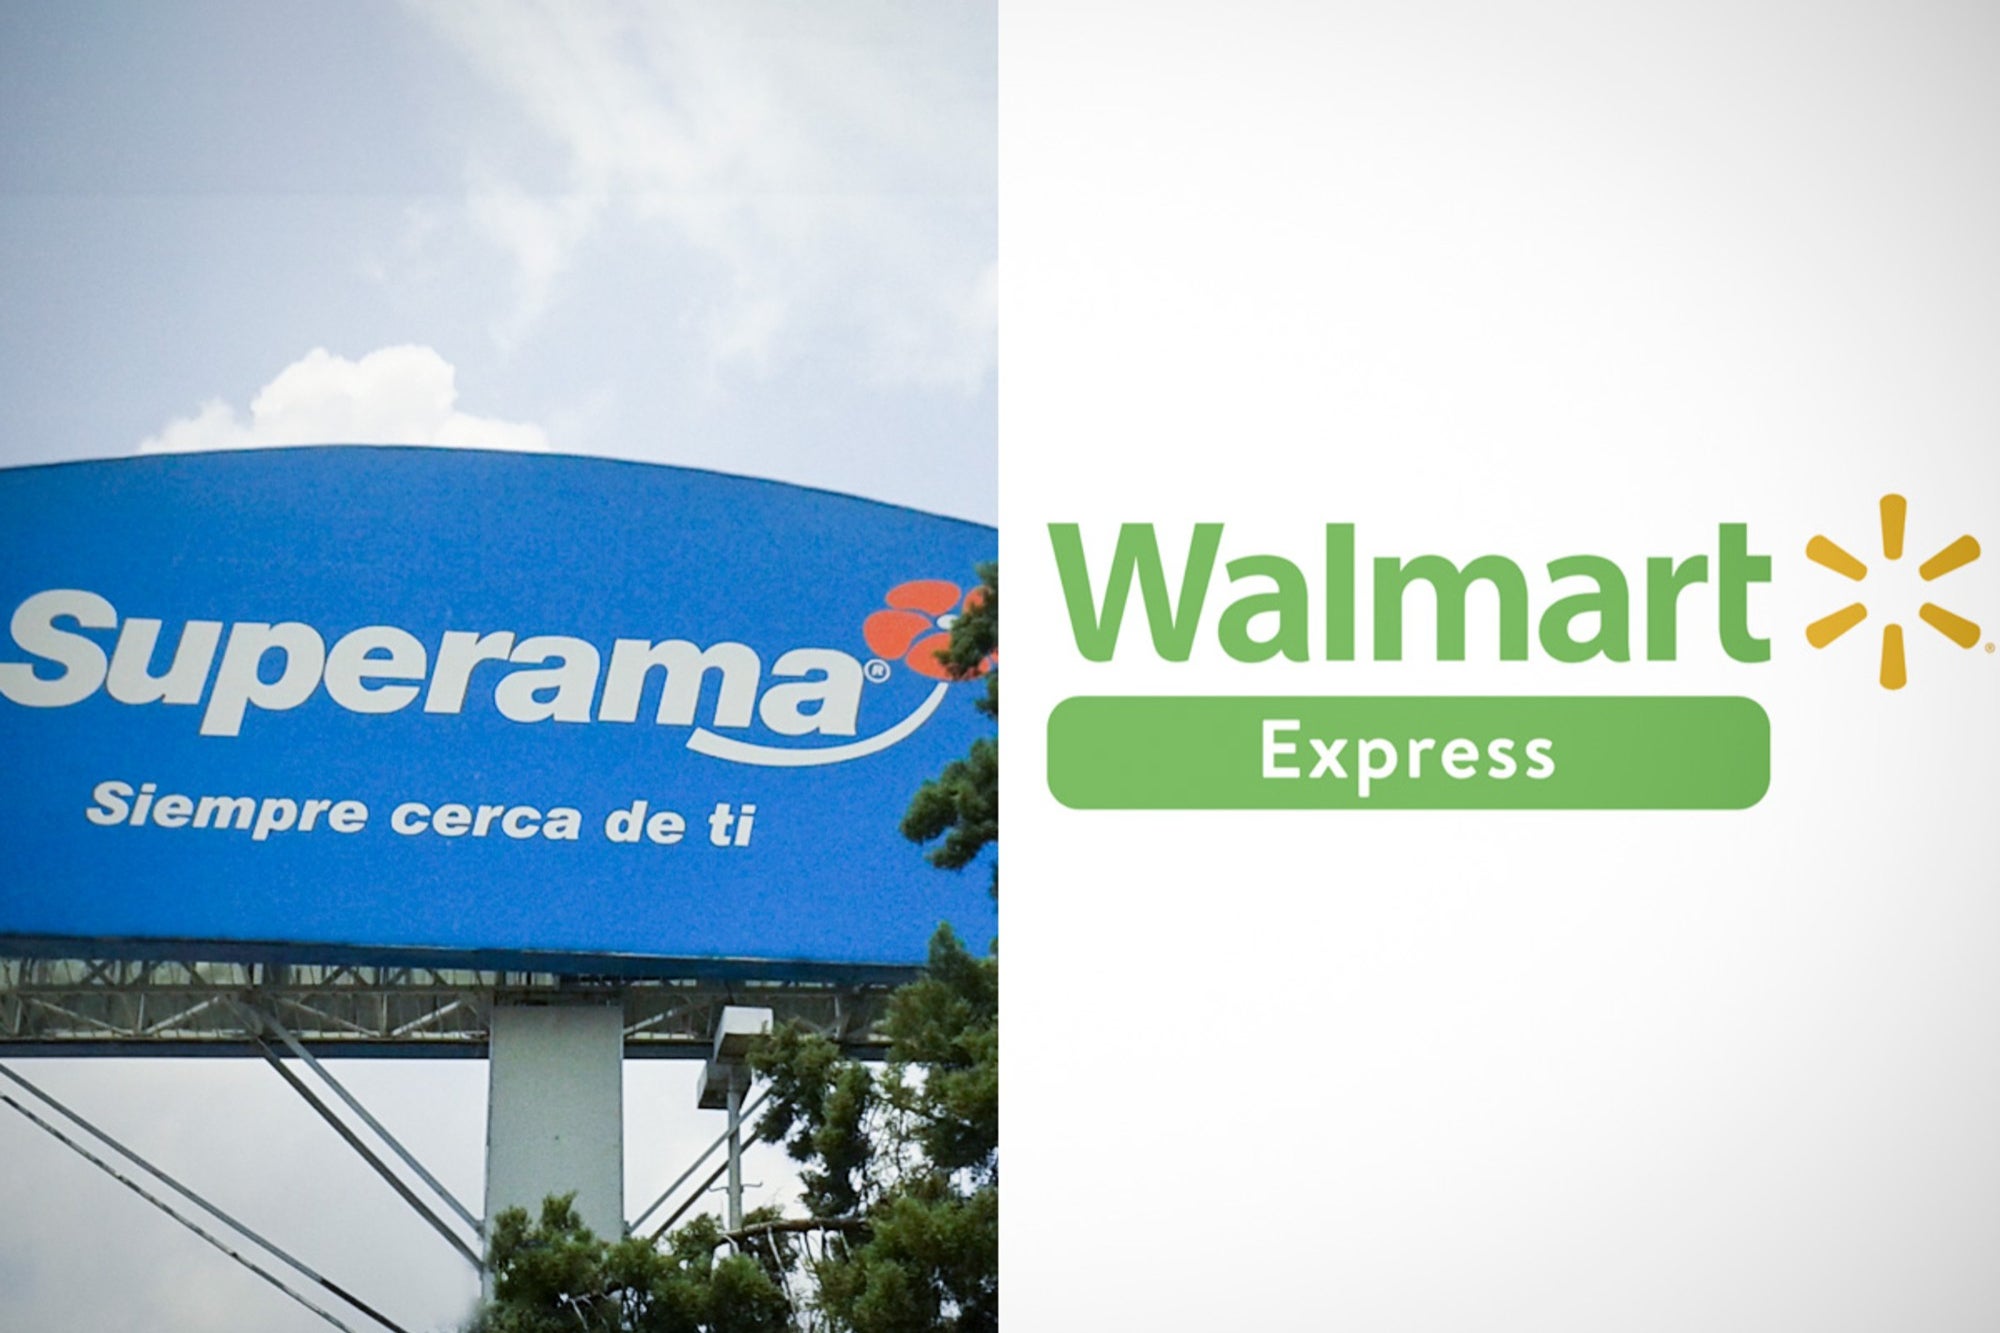 The Superama will disappear and now they will be 'Walmart Express'